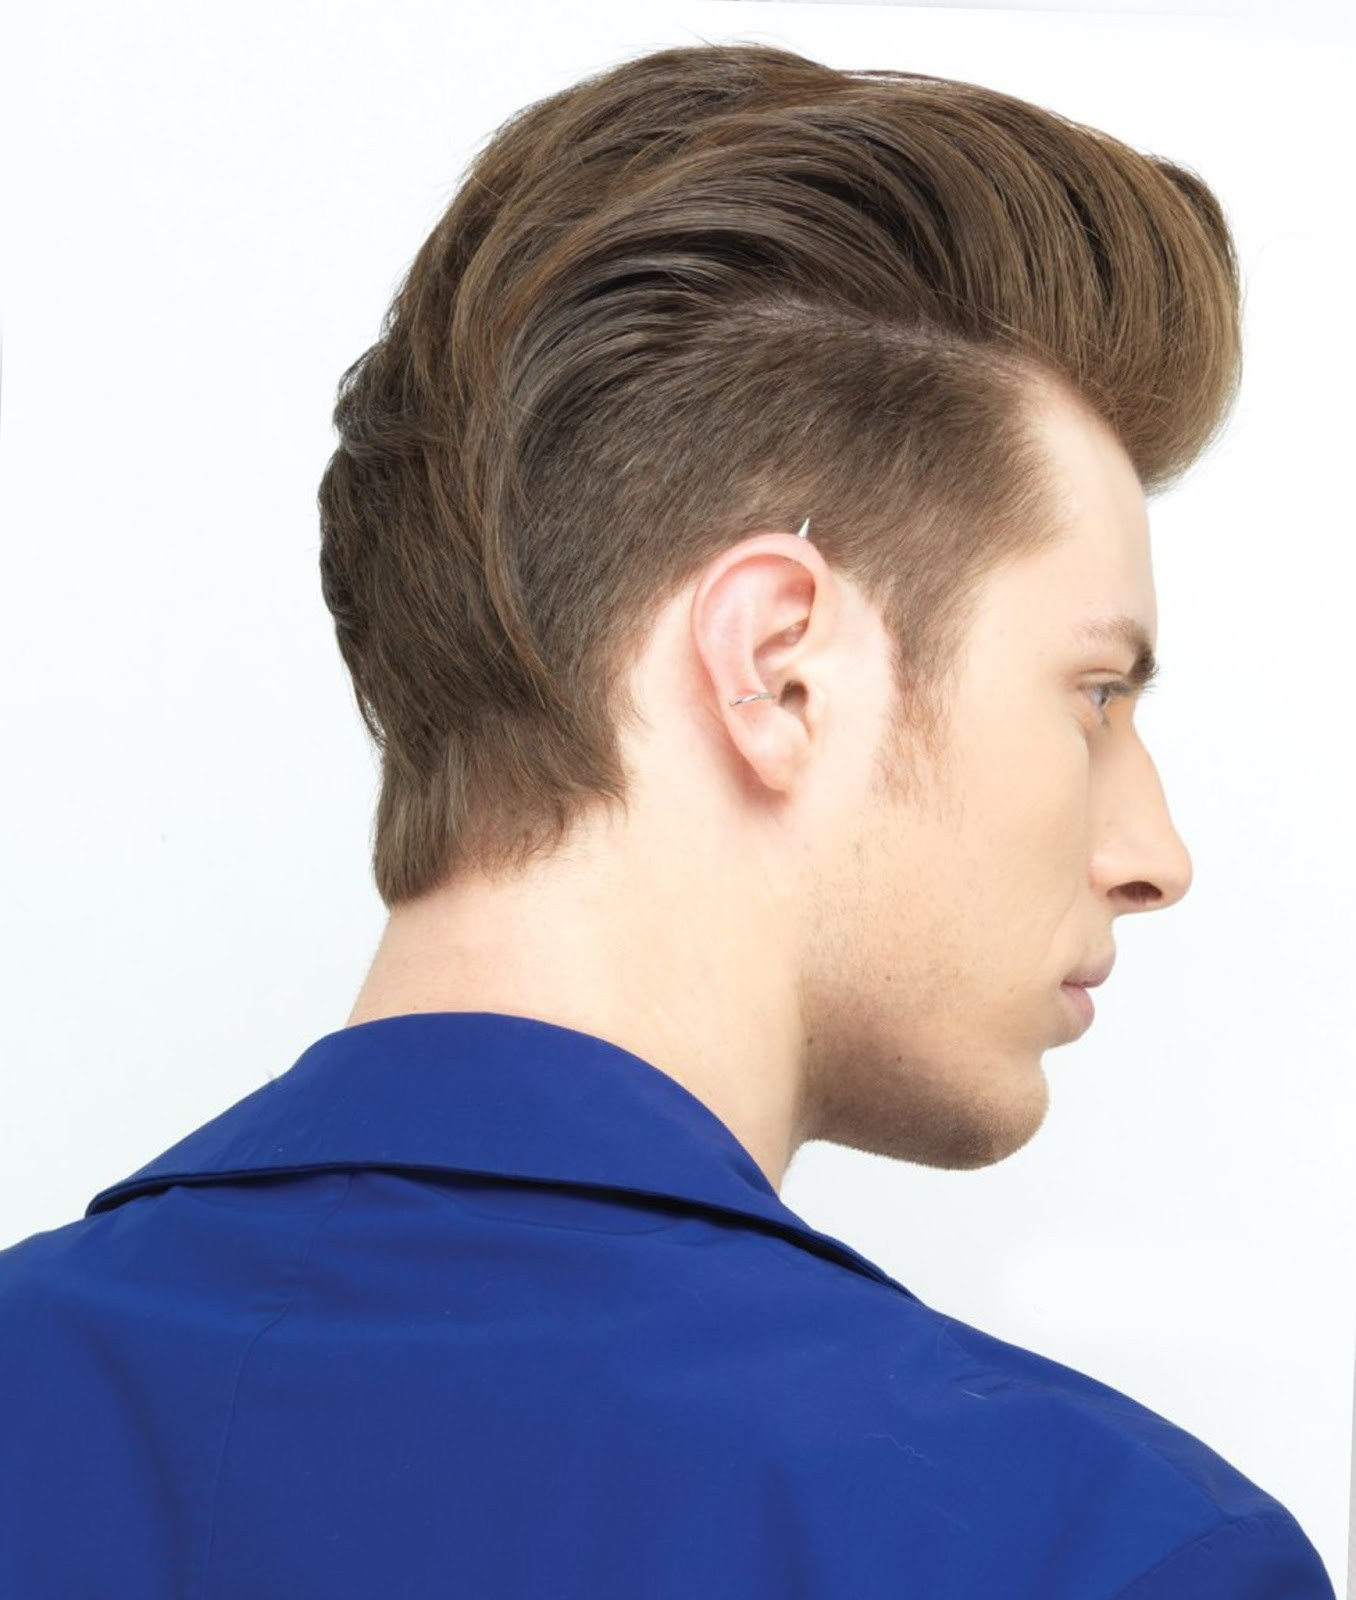 Hairstyles For Men Undercut
 Undercut Hairstyles New Style for Men